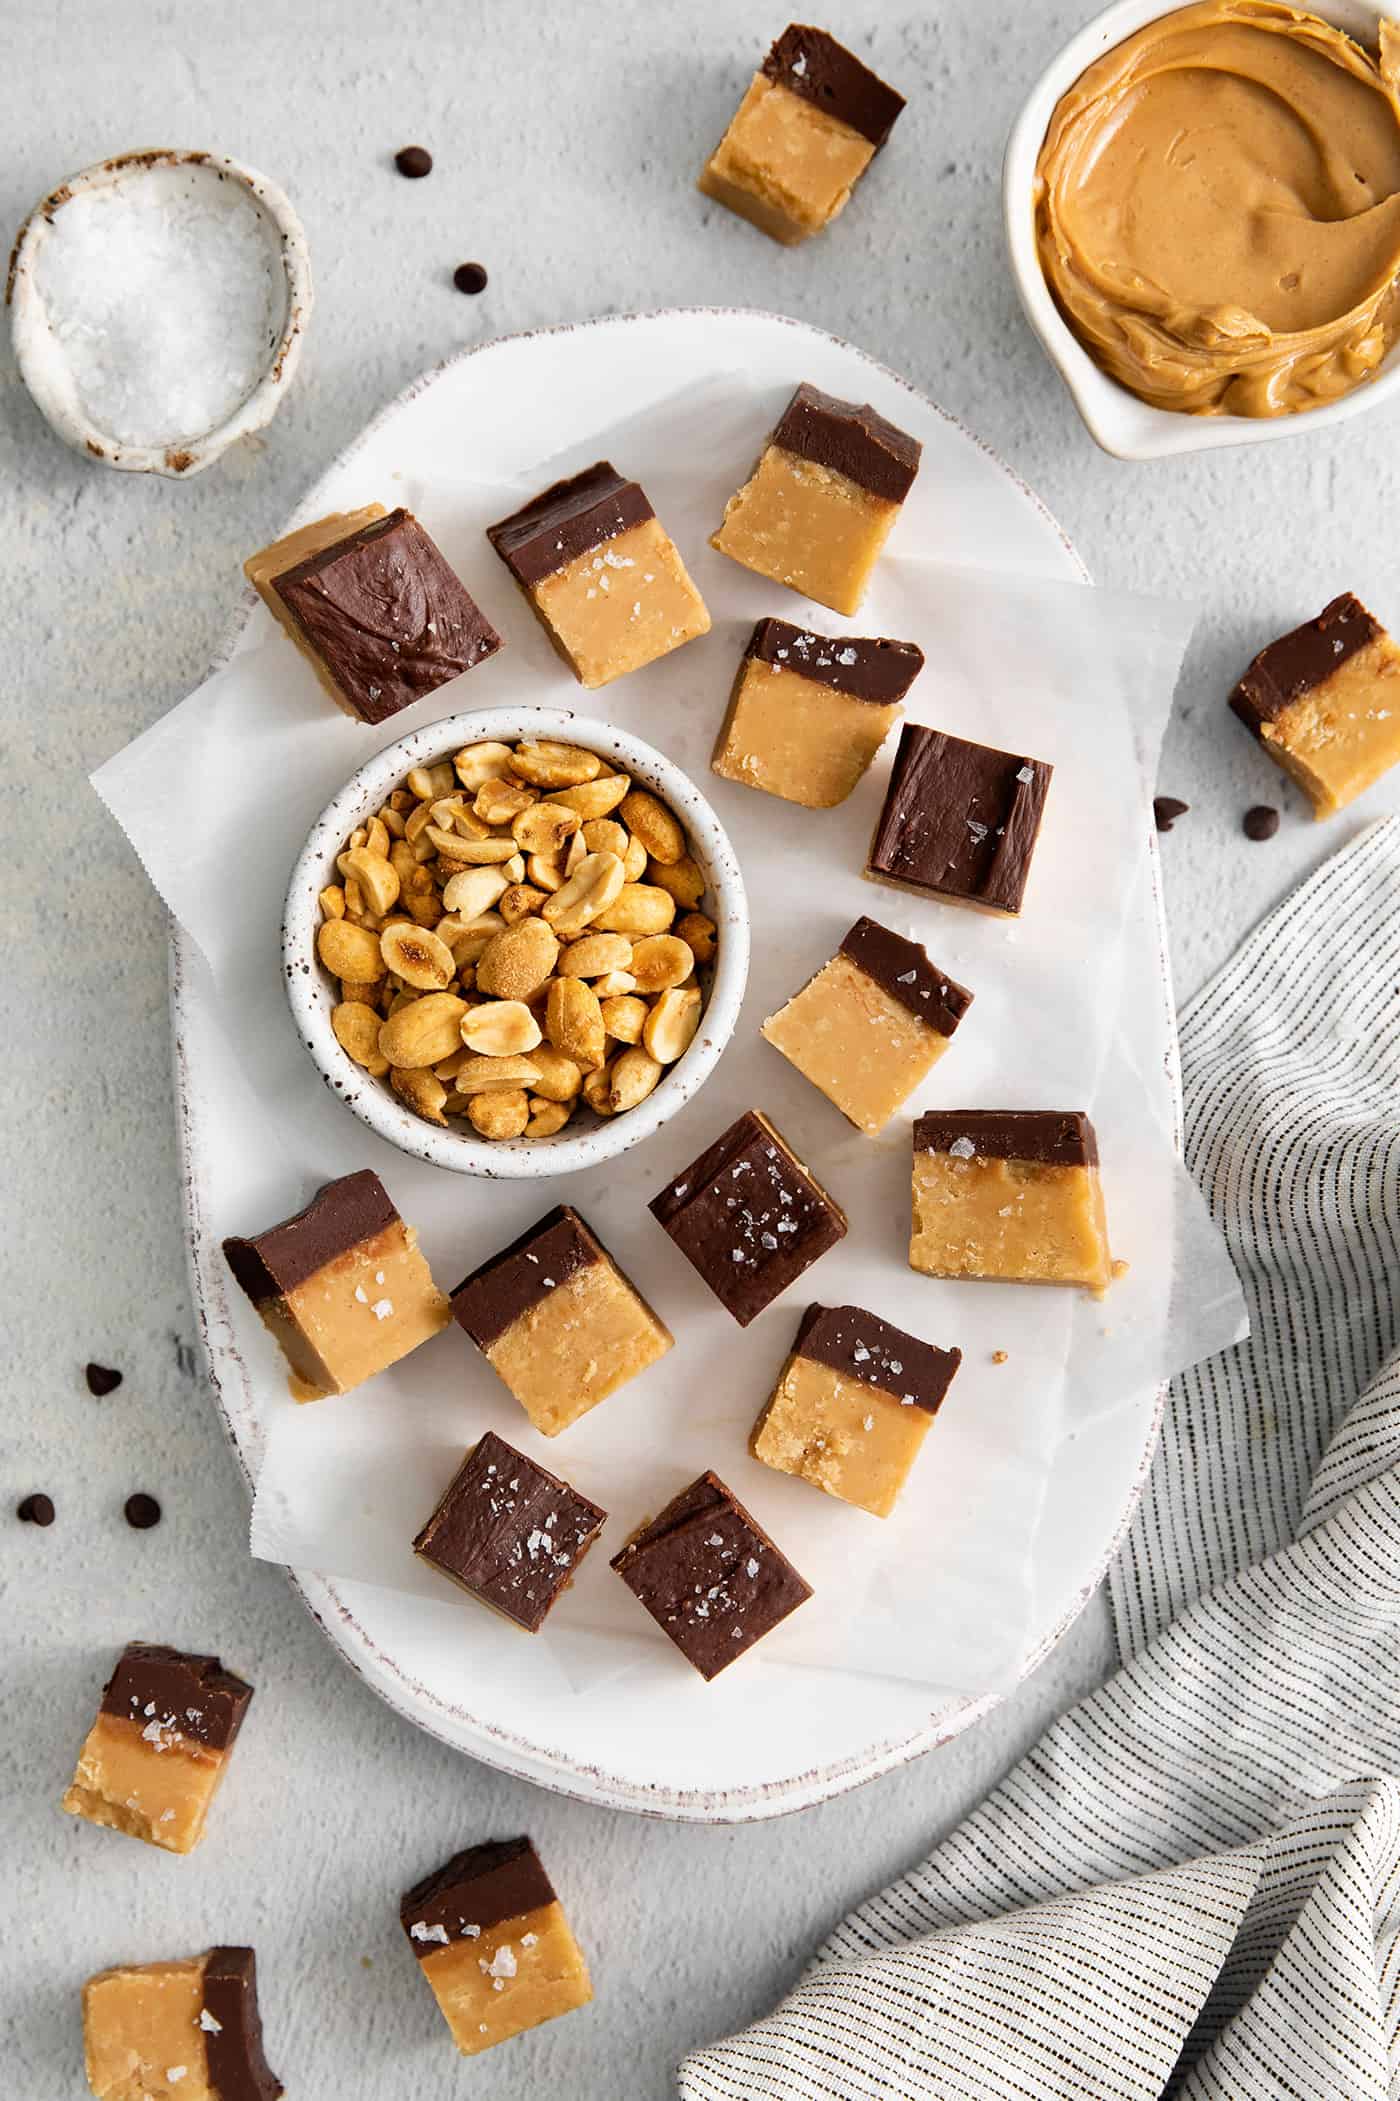 Overhead view of pieces of chocolate peanut butter fudge